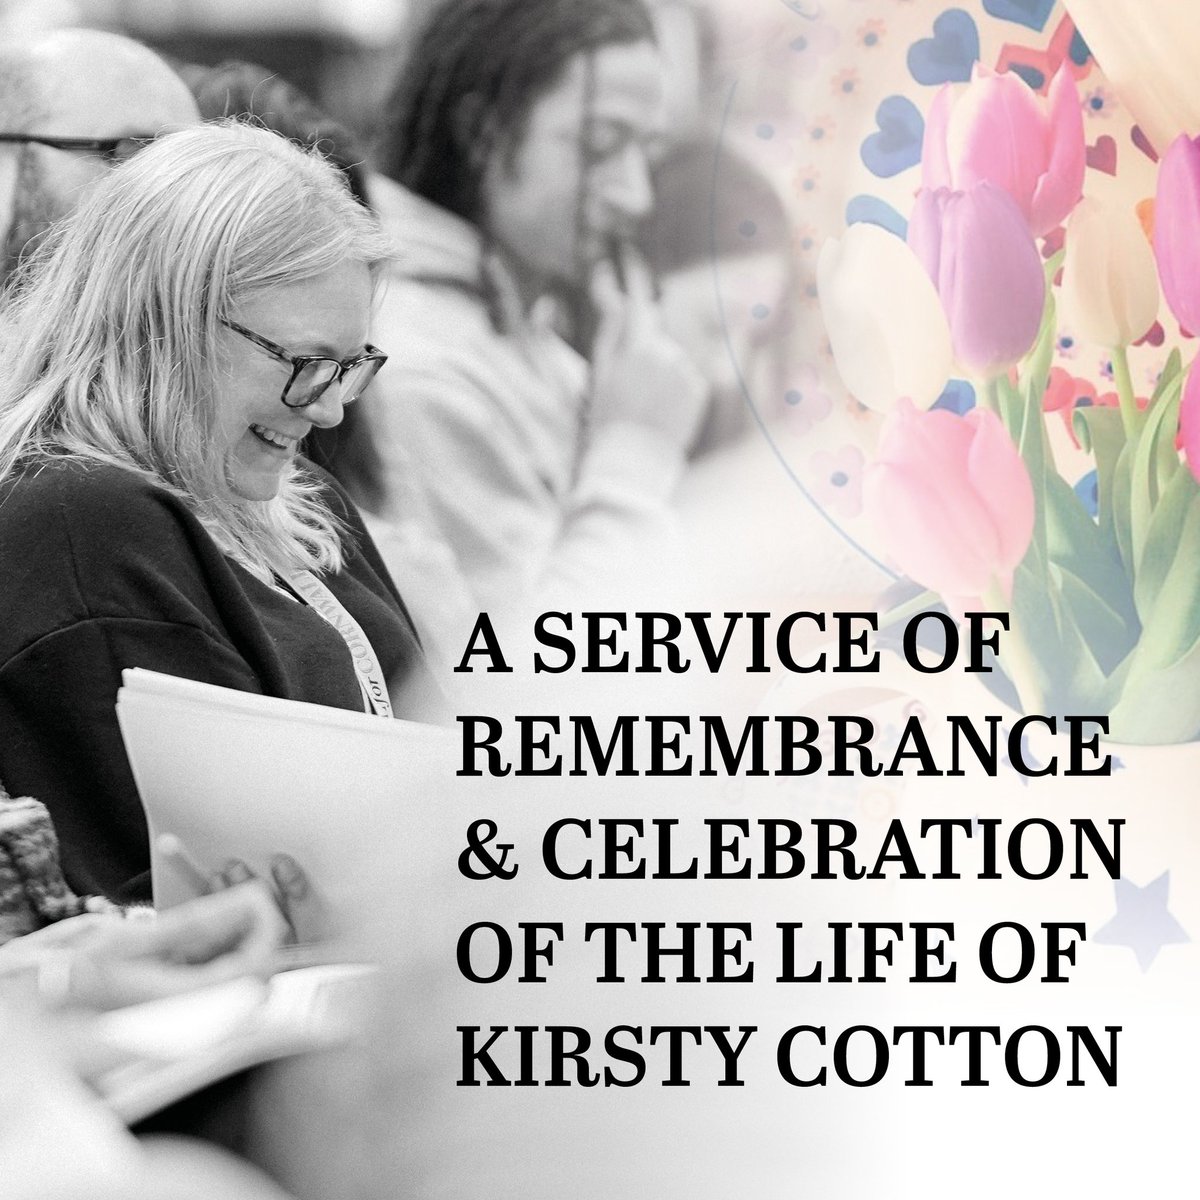 On 25 May we'll be gathering at HfC to celebrate Kirsty. All the details are here bit.ly/hfc-kirsty Please join us if you'd like to reflect, remember and celebrate ✨